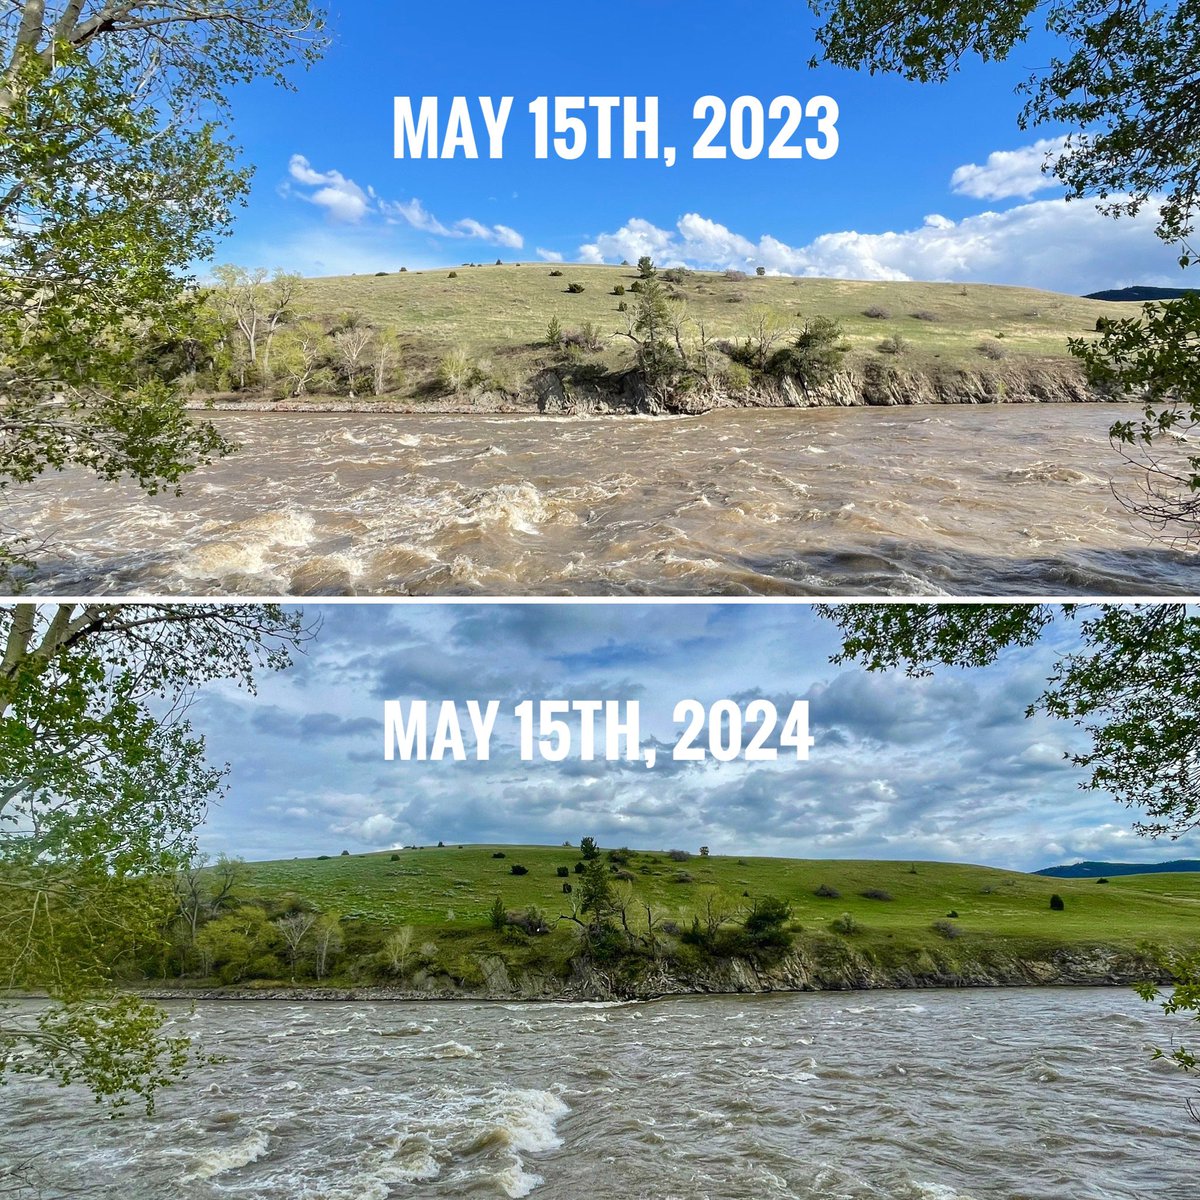 The same spot on the Yellowstone River on May 15th, 2023 and 2024.